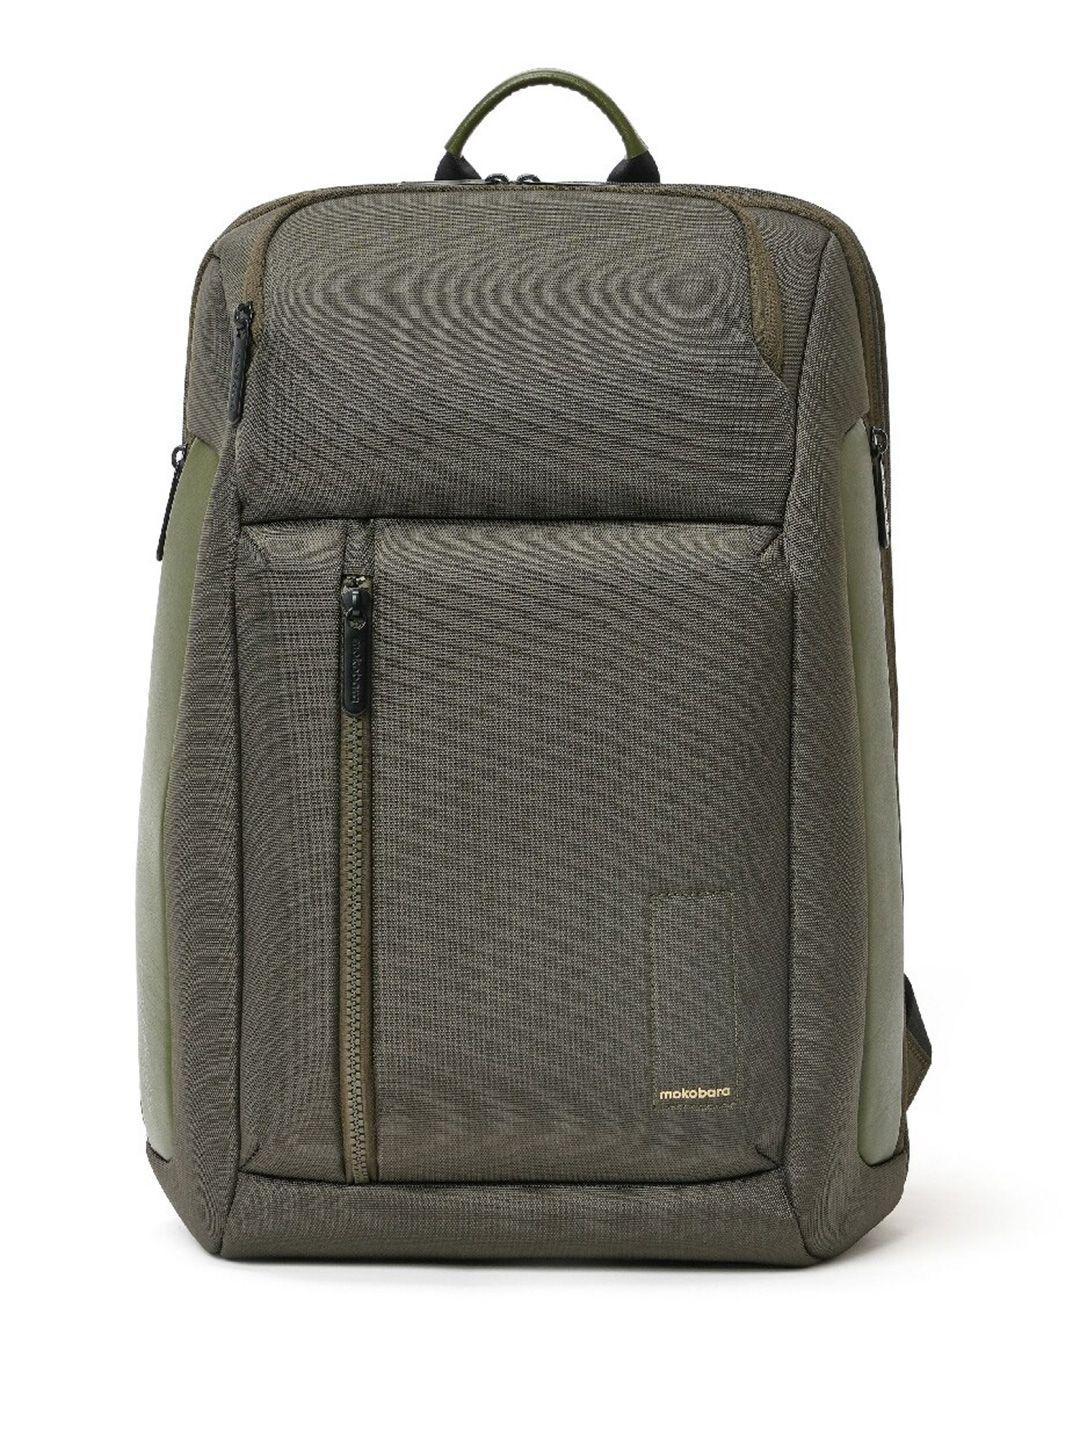 mokobara unisex textured backpack - up to 16 inches